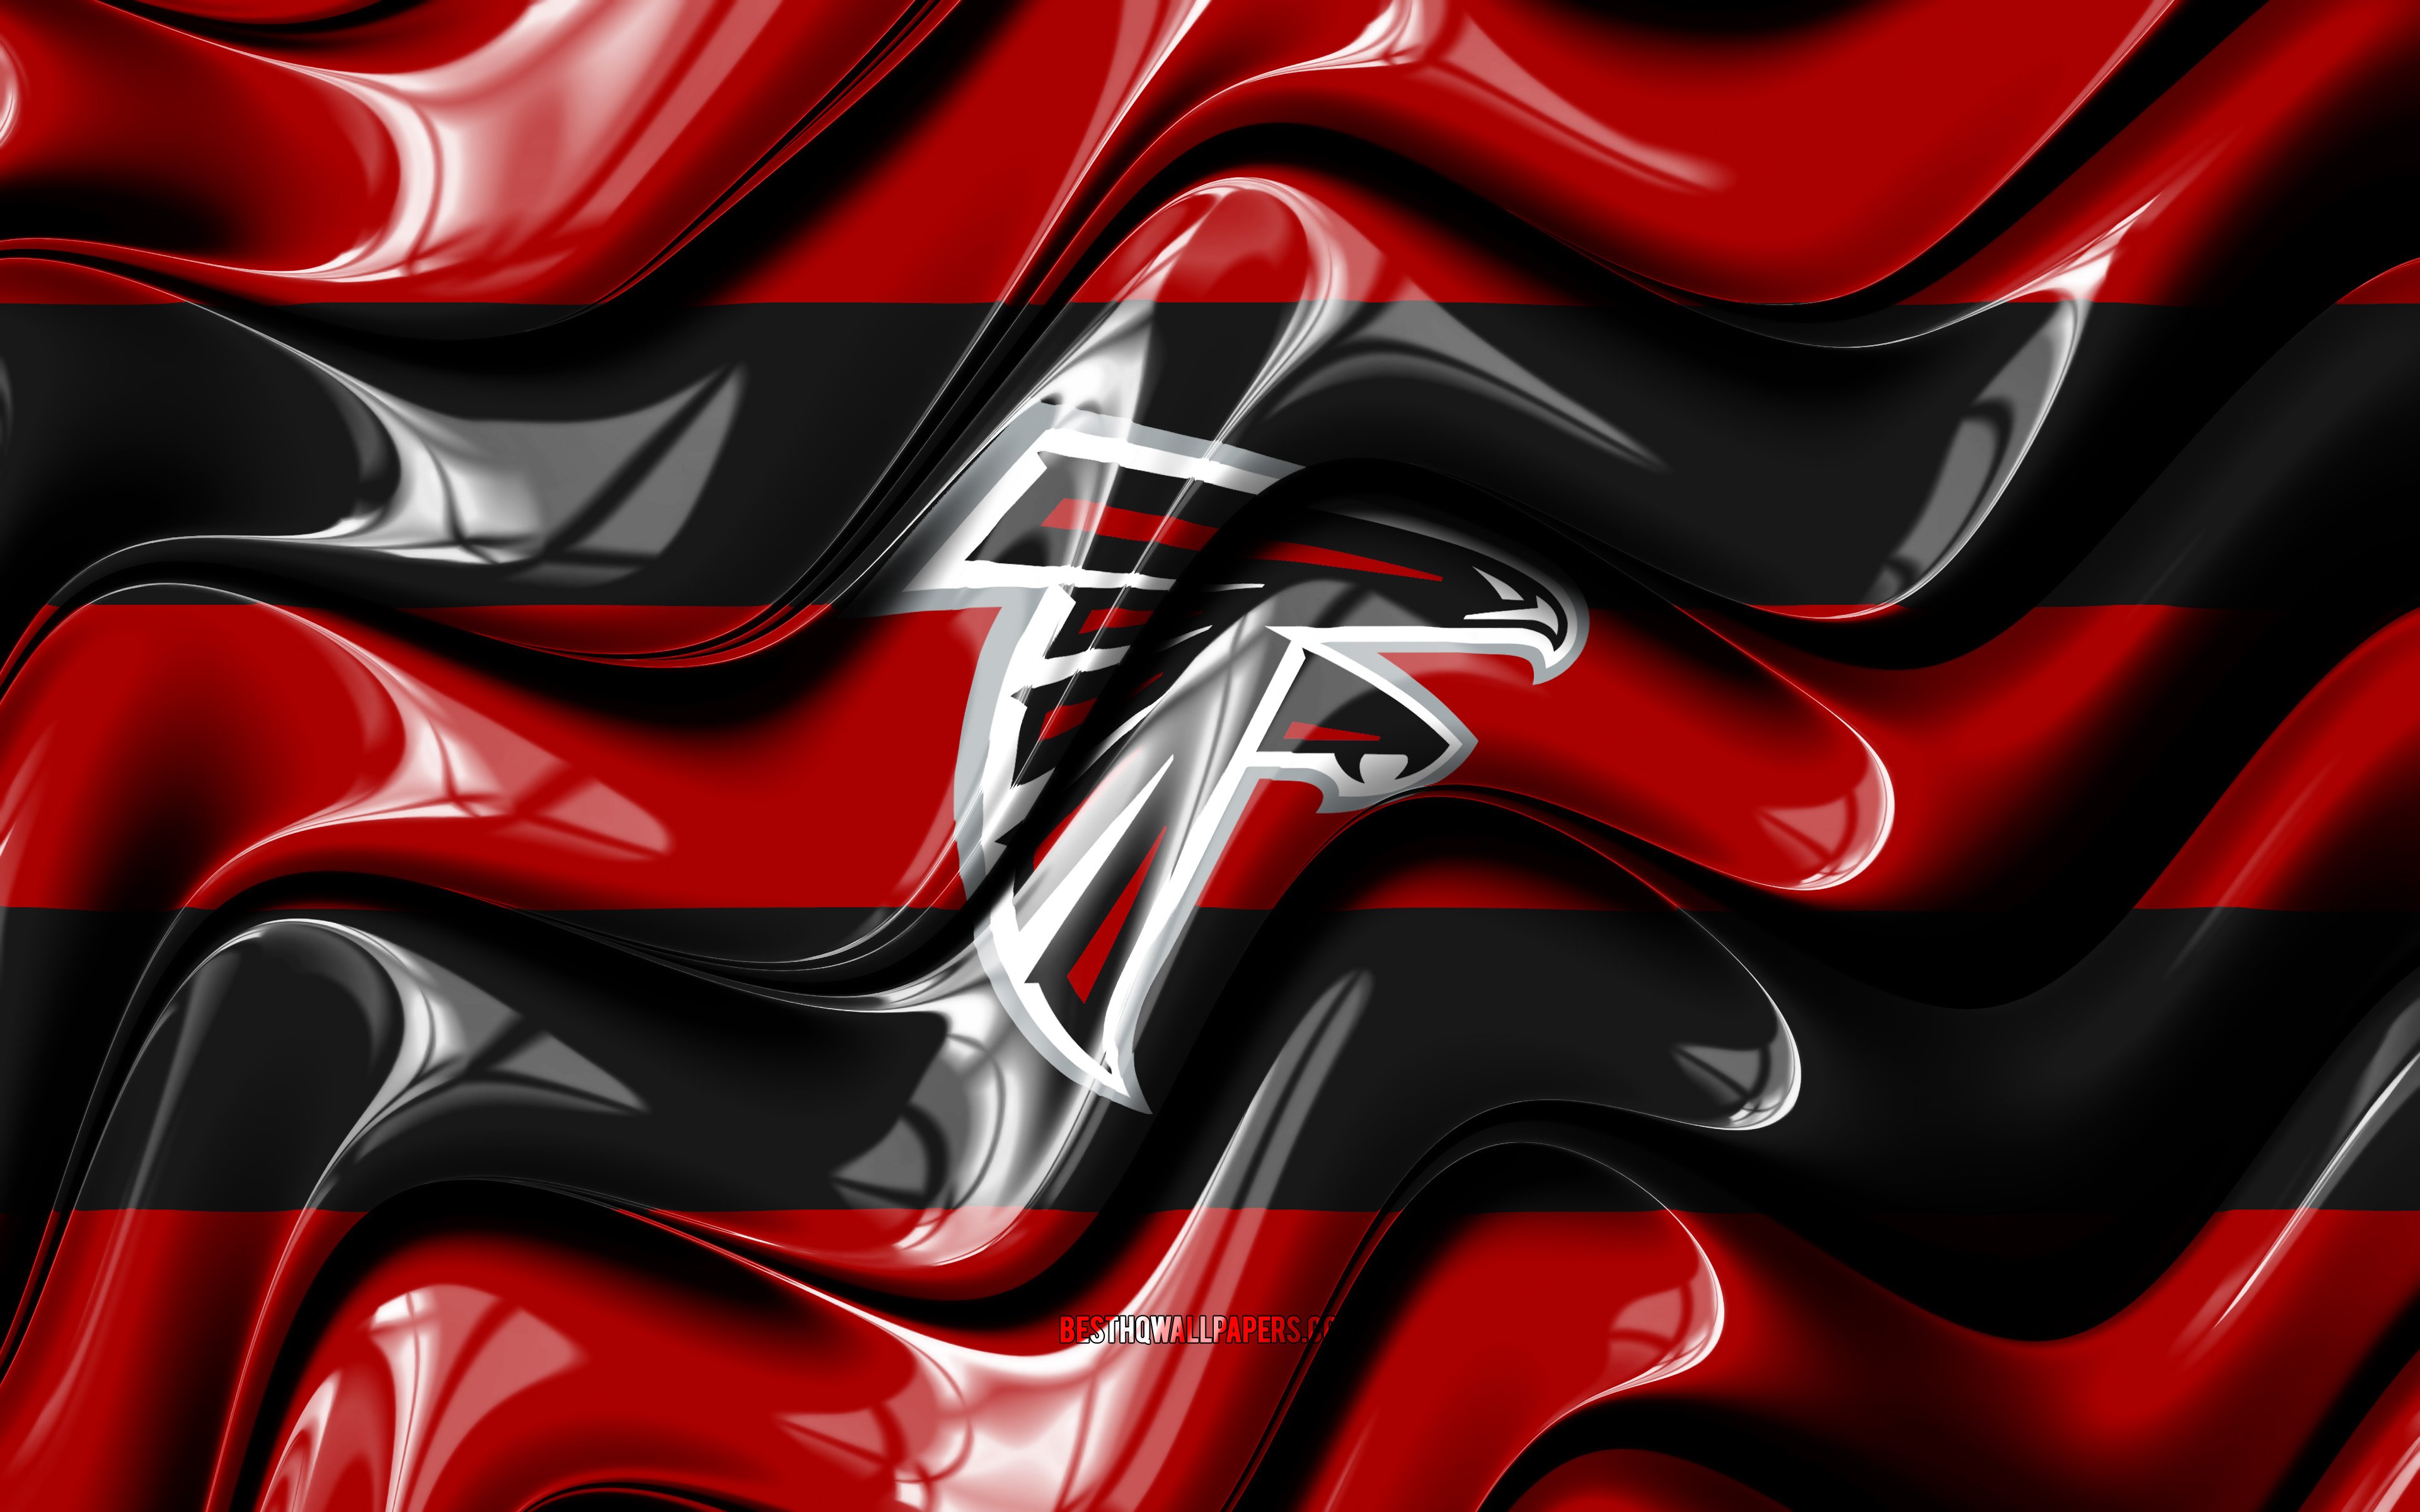 Falcons Wallpapers on WallpaperDog